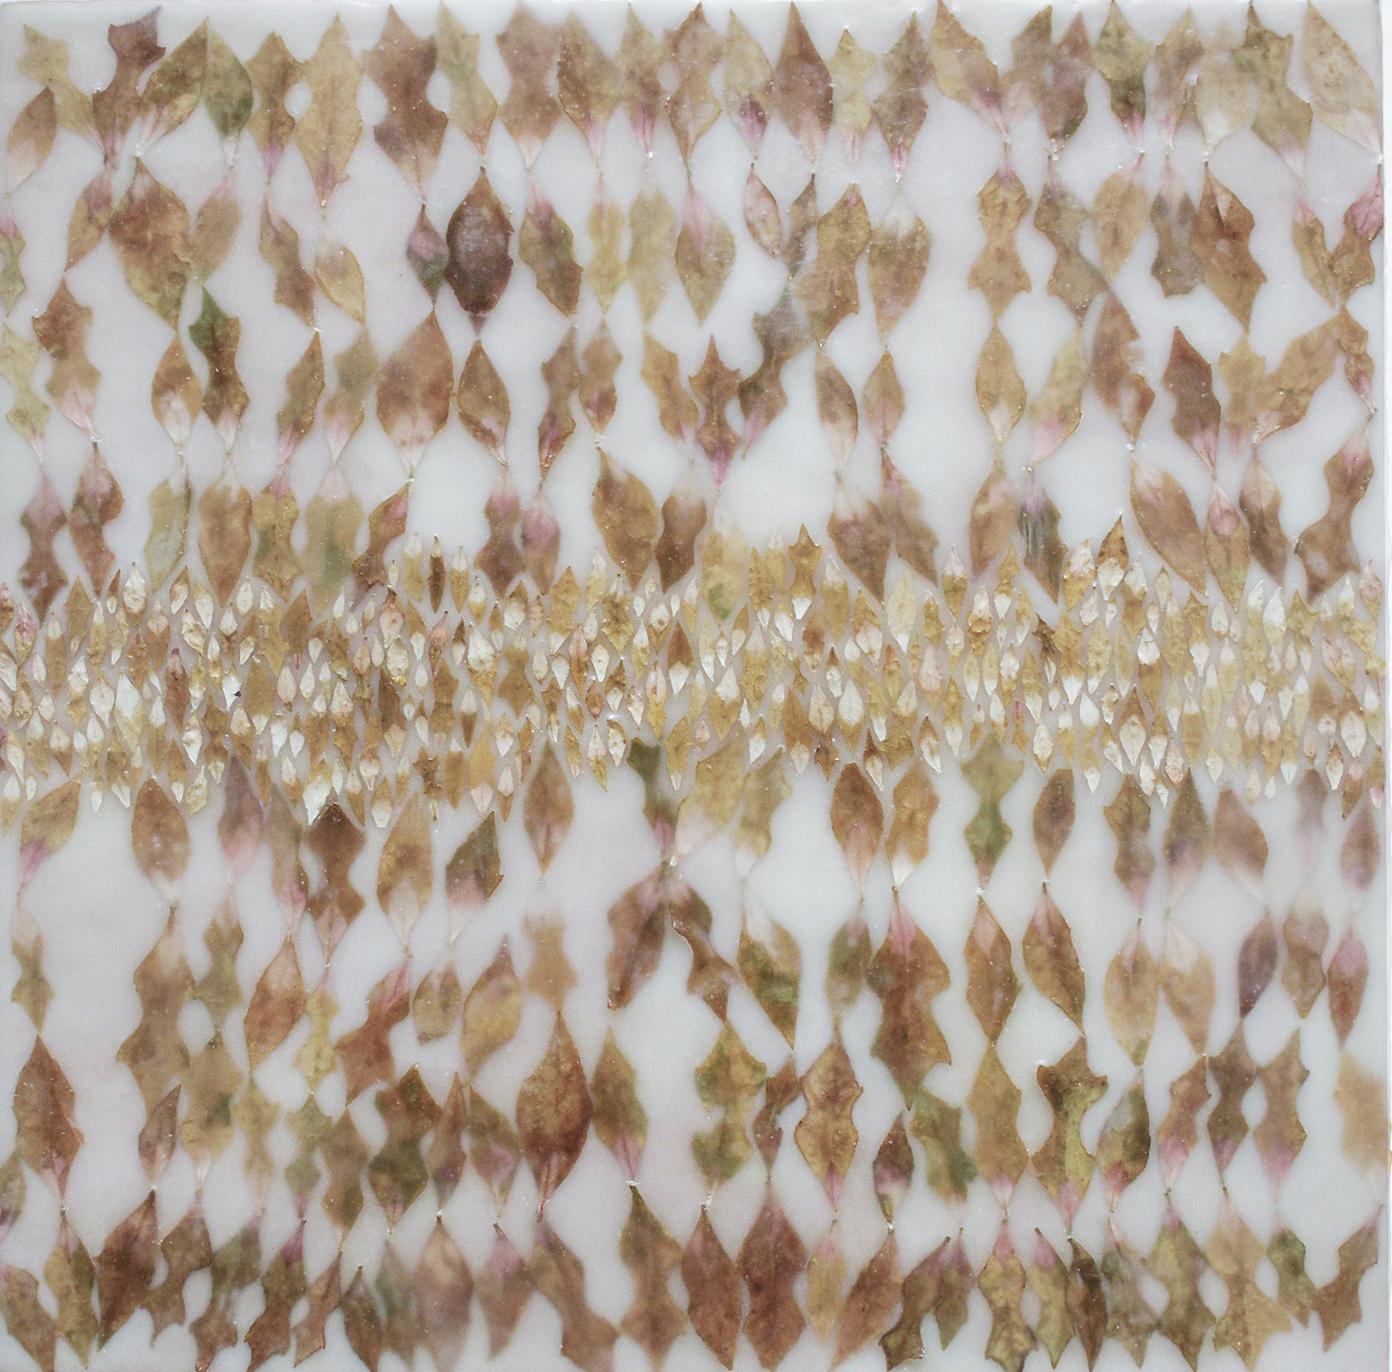 Euphorbic 15 (Abstract Encaustic Painting with Beige & Green Leaves on White)